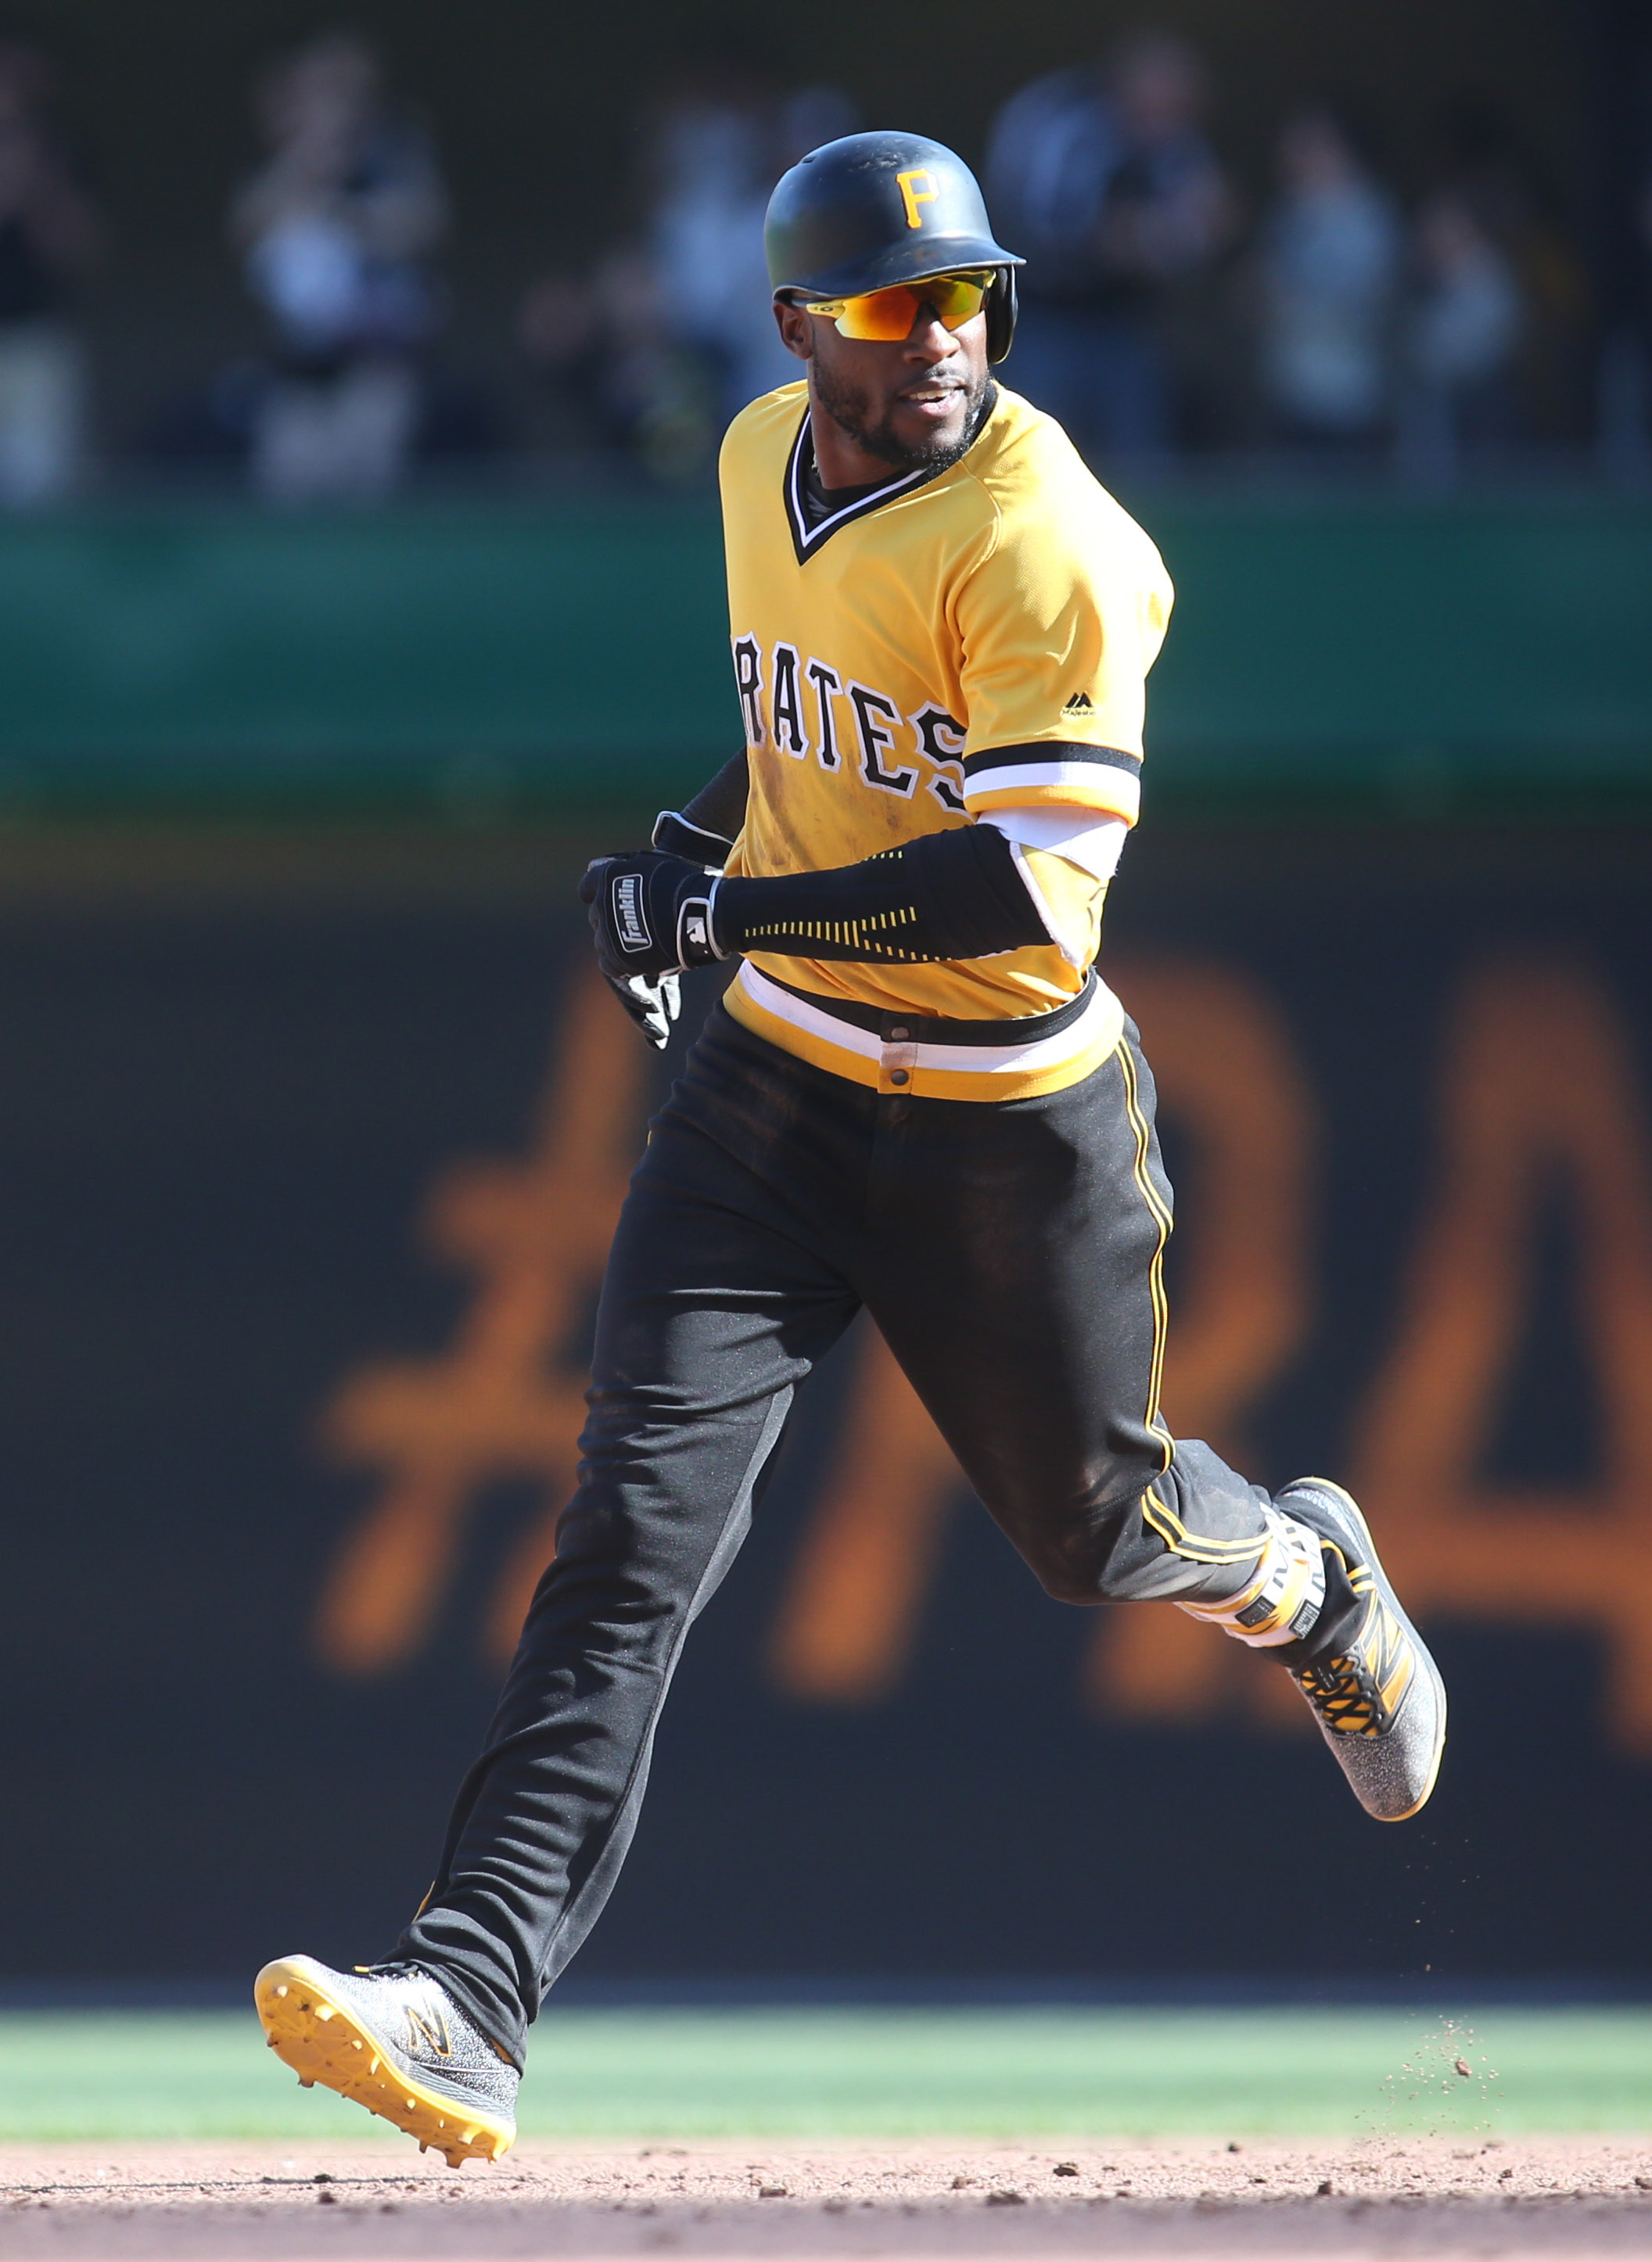 Braves: Could Starling Marte be an answer to the Braves outfield issues? 